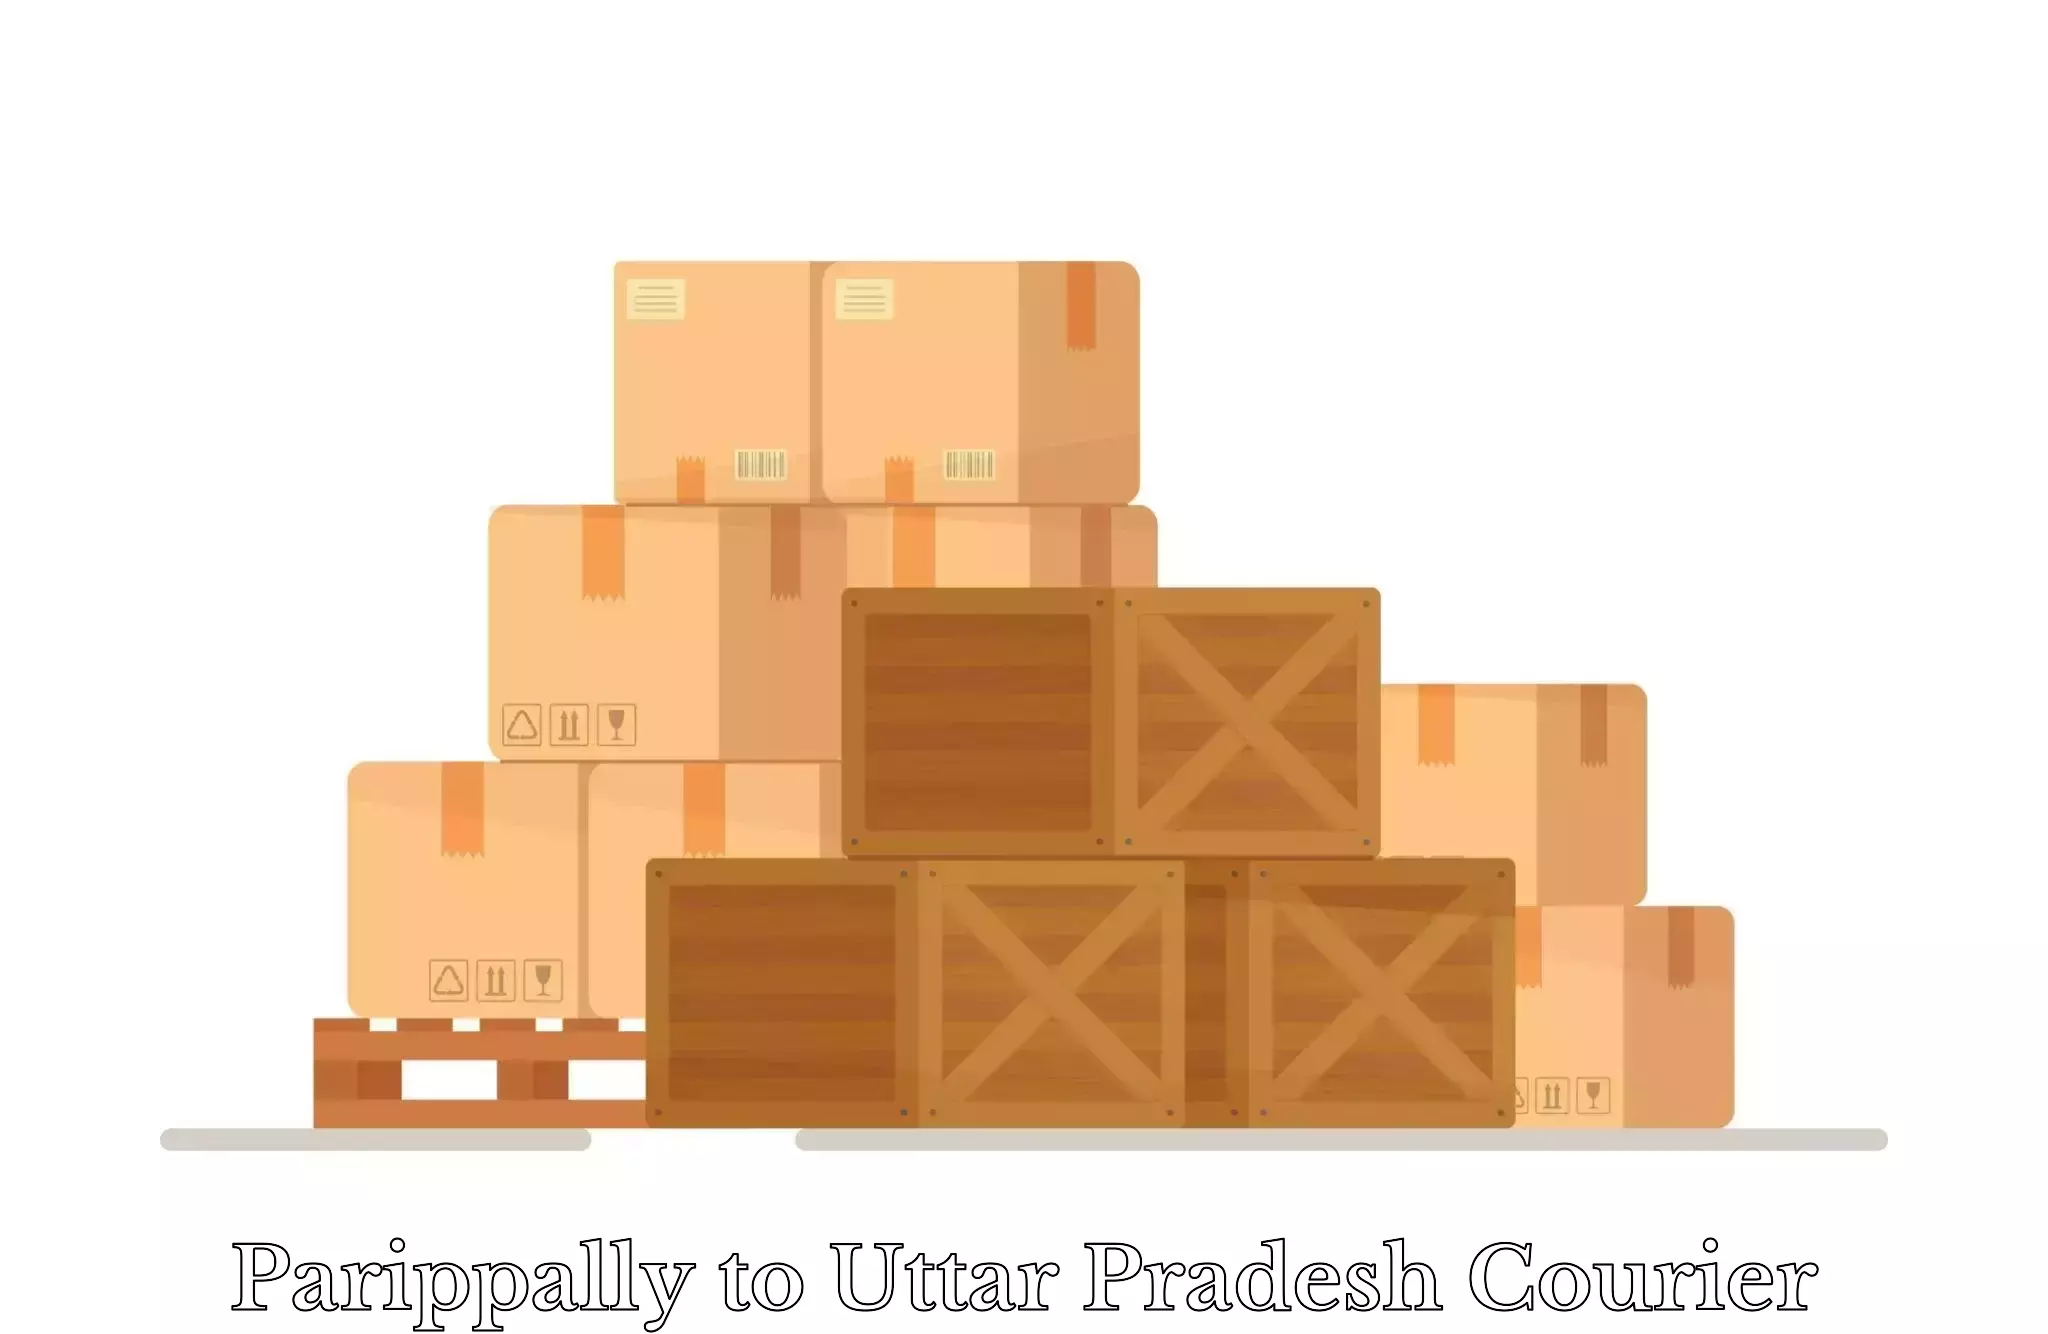 Luggage shipment tracking Parippally to IIT Kanpur